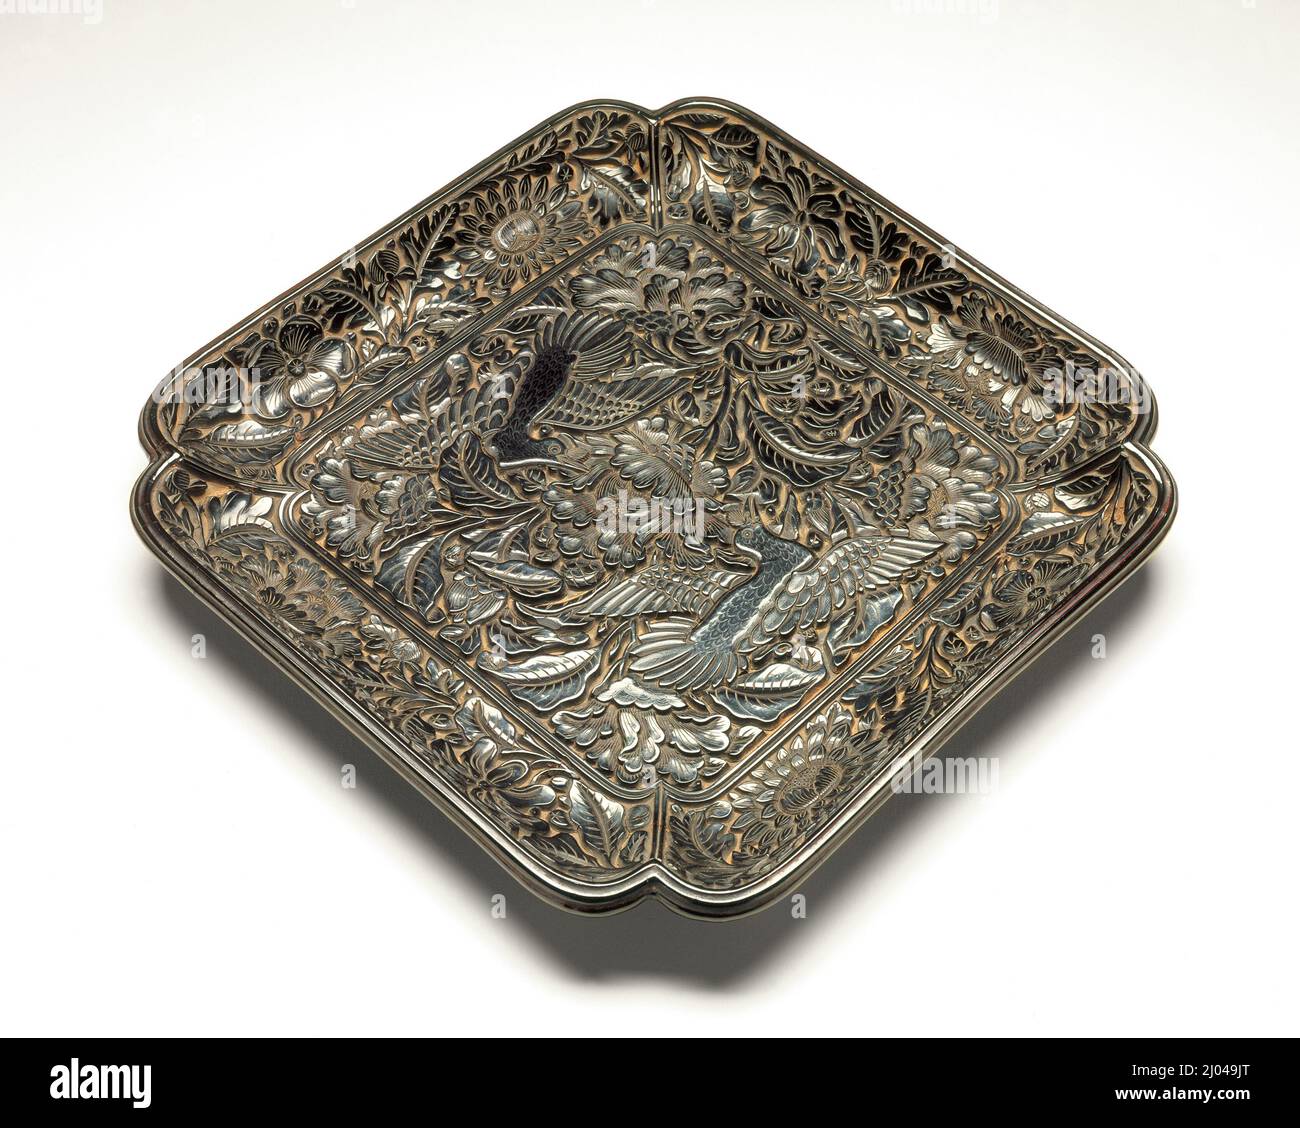 Square Tray (Fang Pan) with Pair of Birds in Peonies. China, Chinese, early Ming dynasty, about 1368-1450. Furnishings; Serviceware. Carved black lacquer on wood core Stock Photo